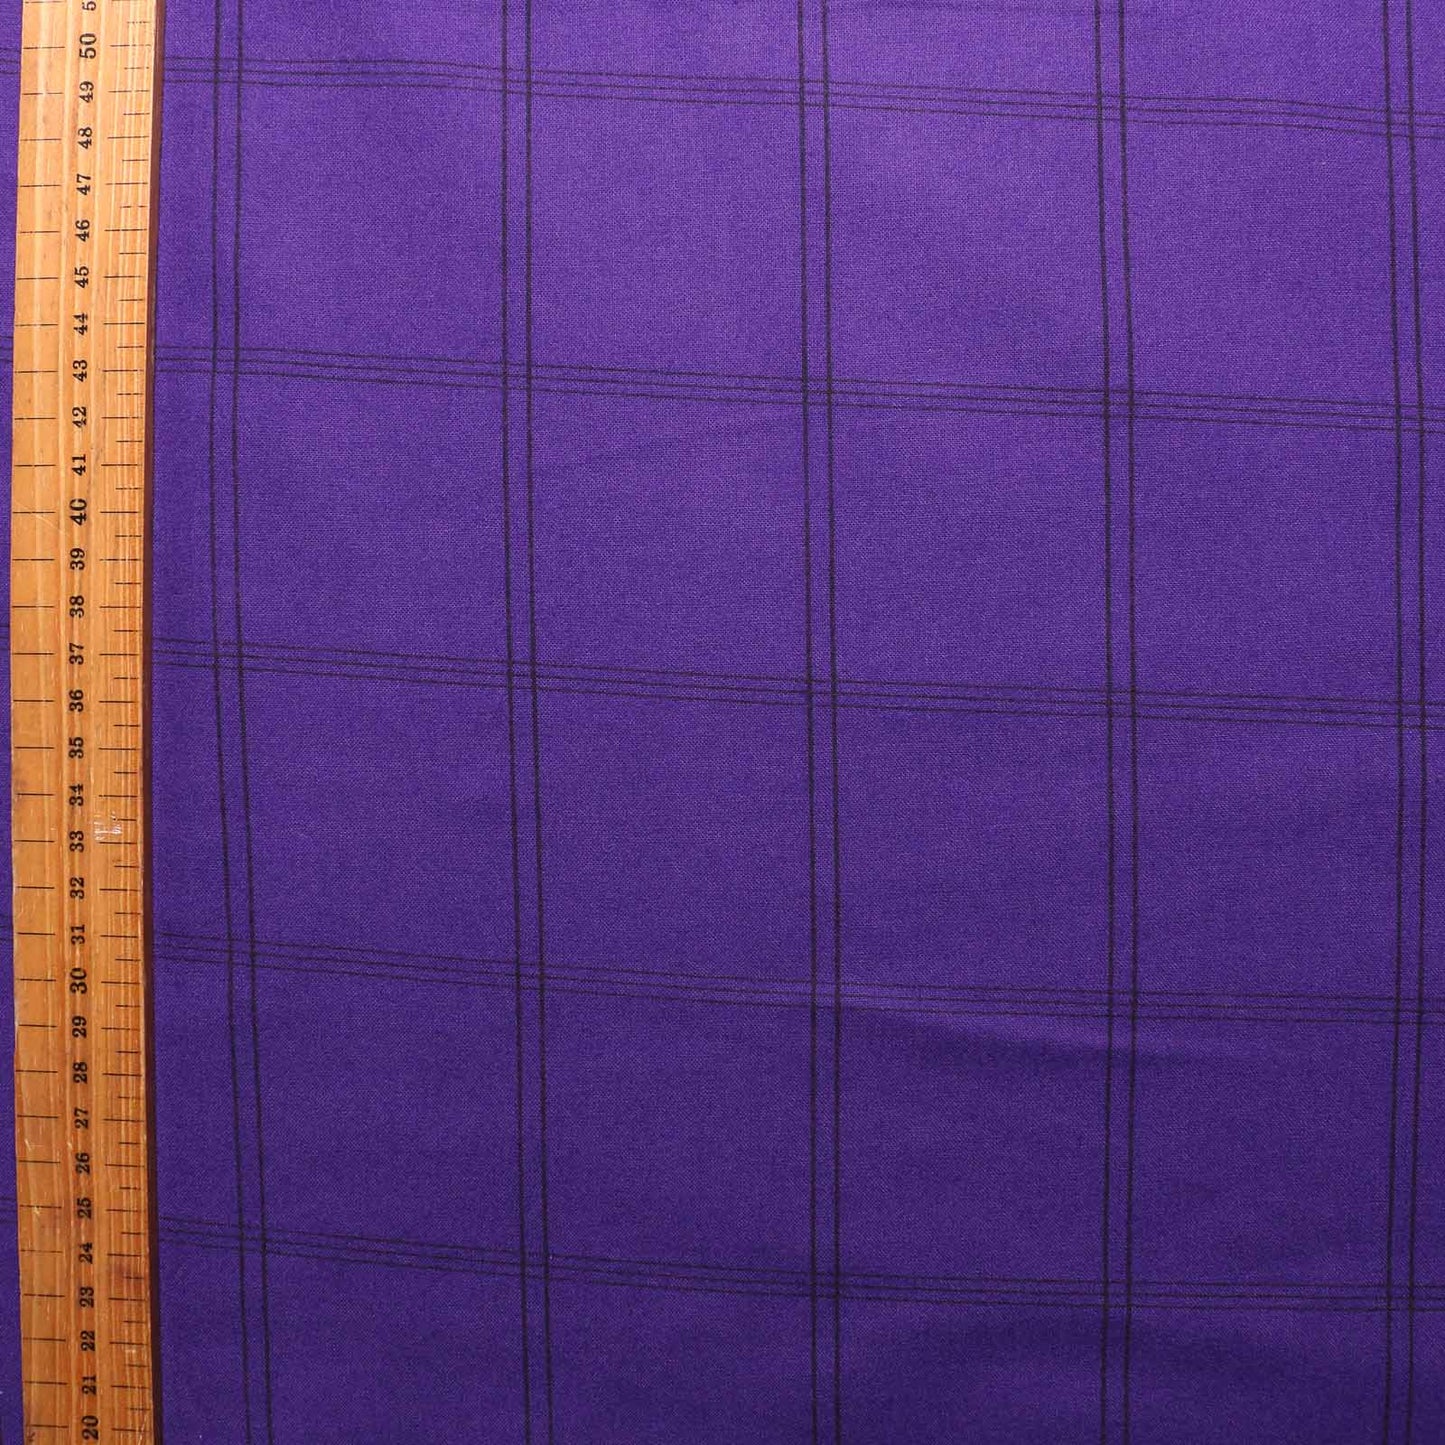 metre brushed cotton dressmaking fabric with purple and black check design